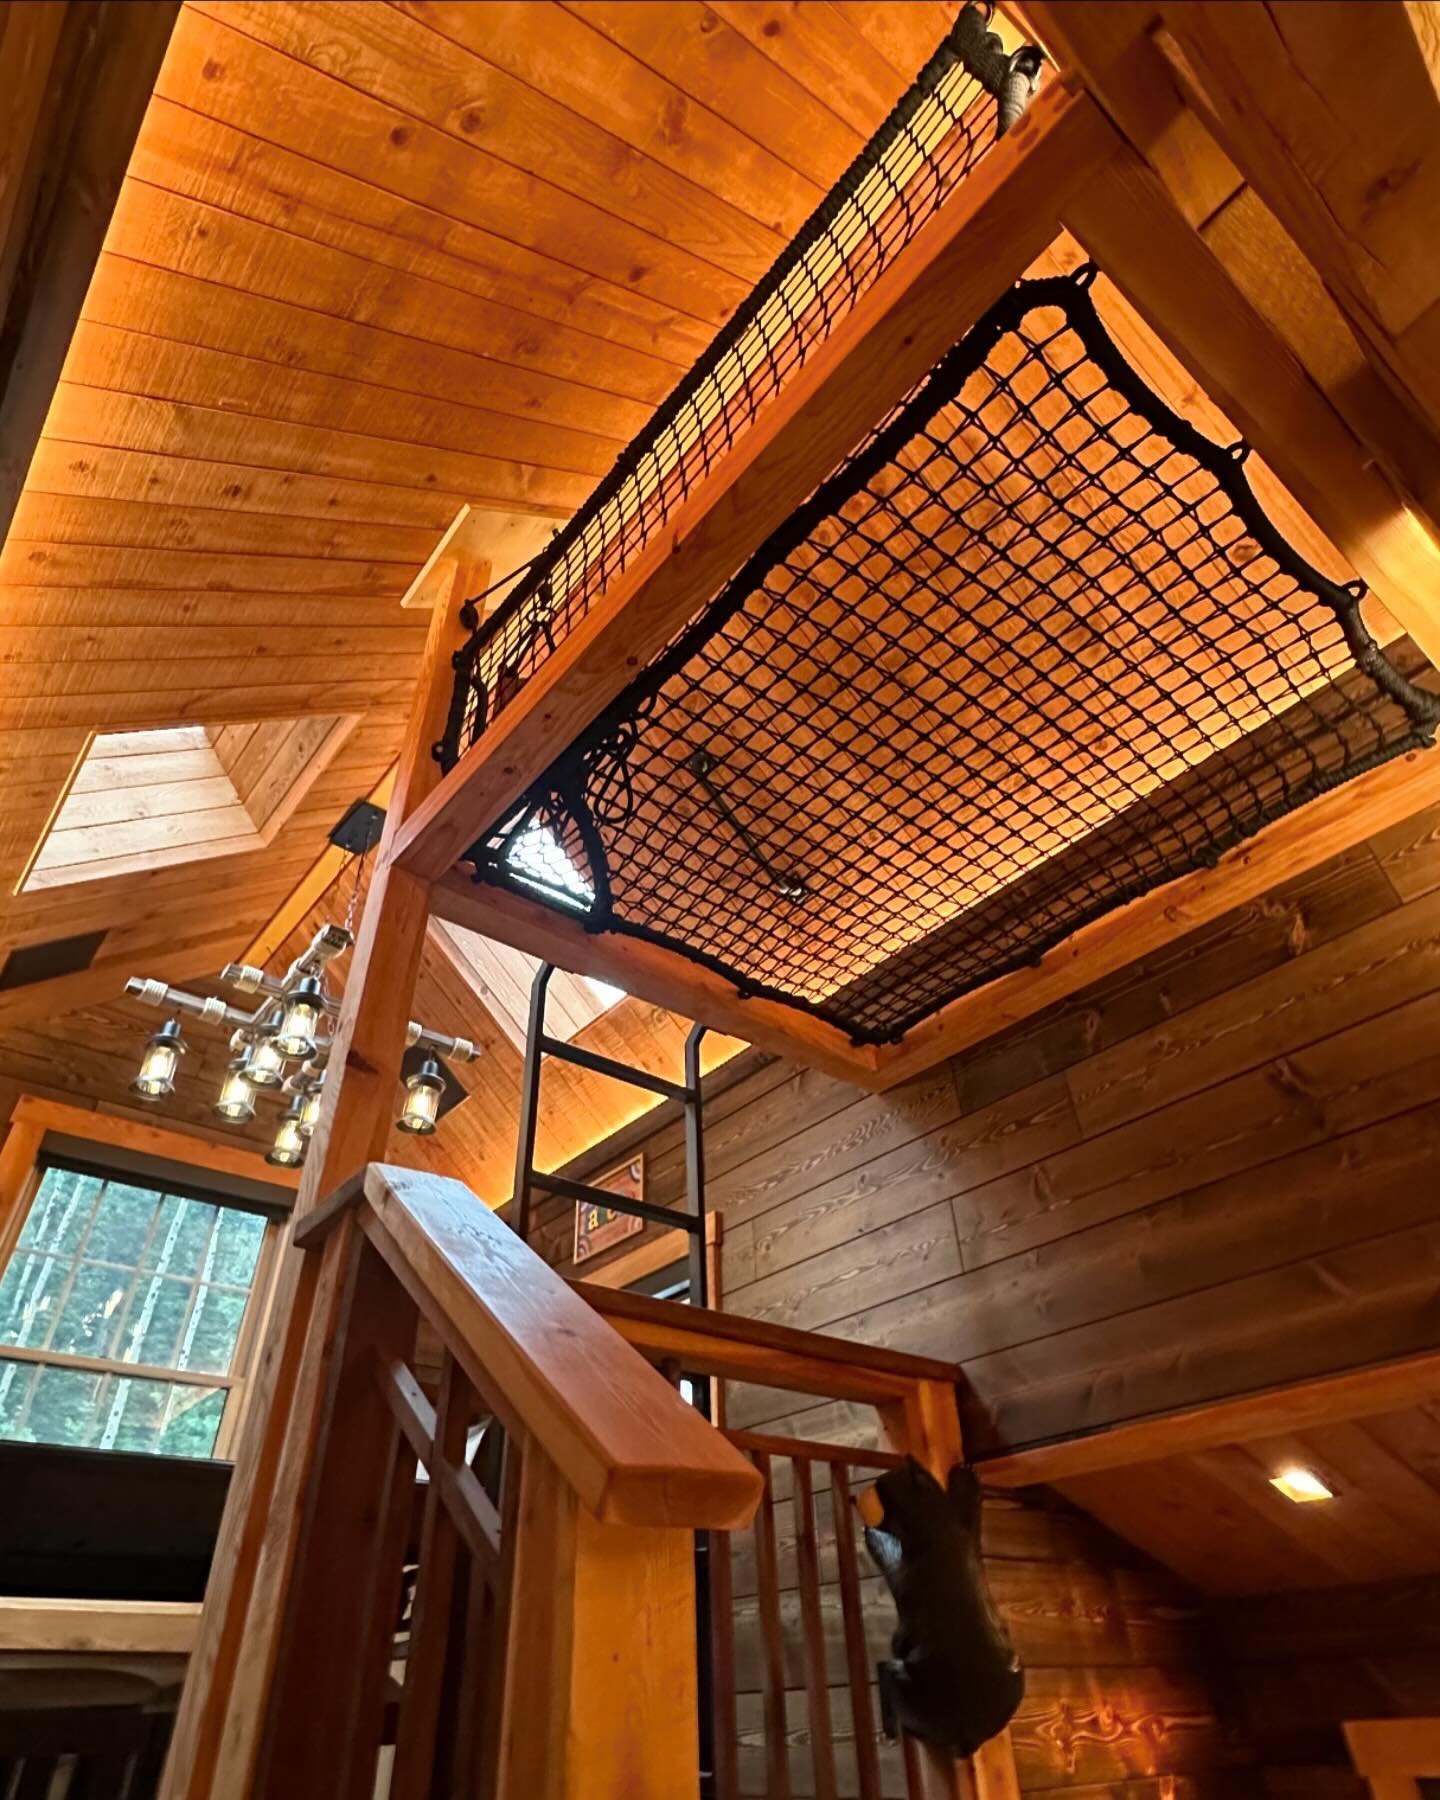 The latest and greatest addition to our Black Hawk project!  Our client @ultimatecabinexperience had us back to build this cozy little net loft in the uppermost gable of the cabin.  Accessed from the &ldquo;game room&rdquo; loft from a custom steel l